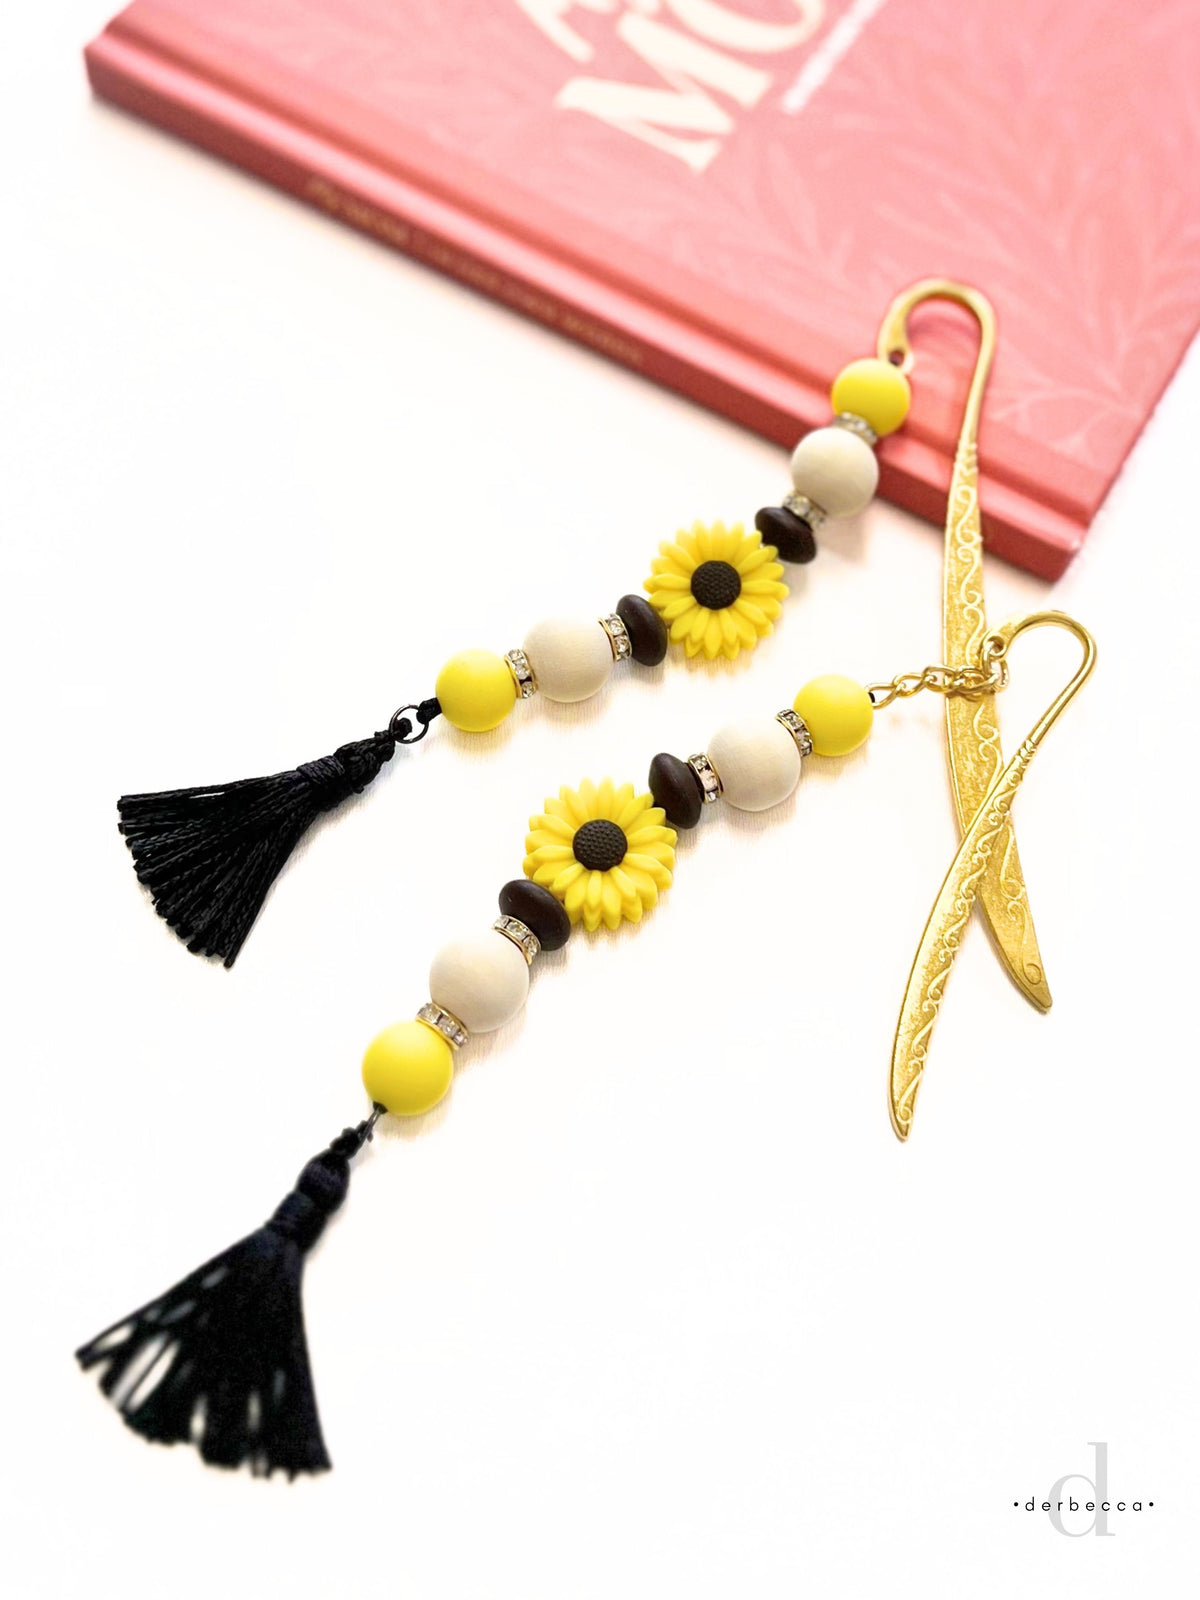 Two beadable bookmark options at two different lengths both 4 and 5 inch